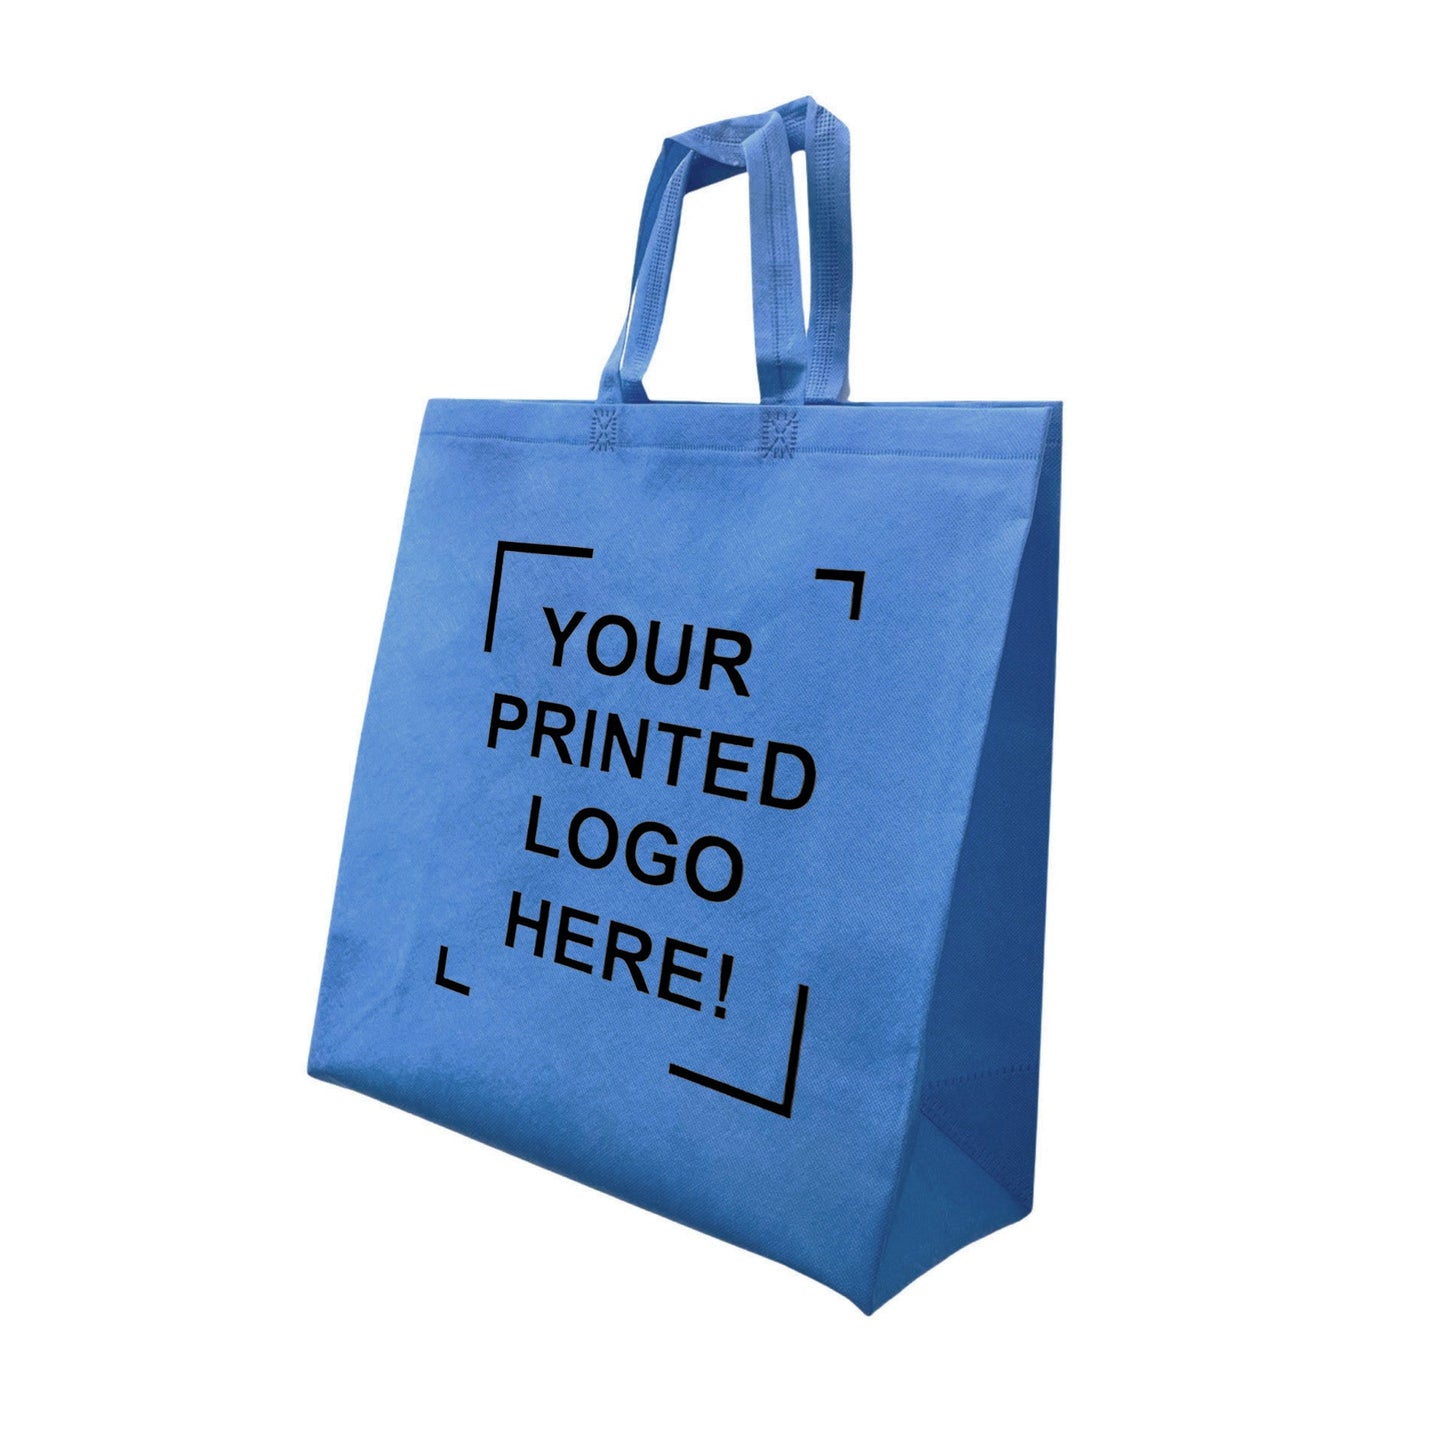 200pcs, Non-Woven Reusable Grocer Bag 15.5x6x15.5 inches Blue Shopping Bags Flat Handles, One Color Custom Print, Printed in Canada